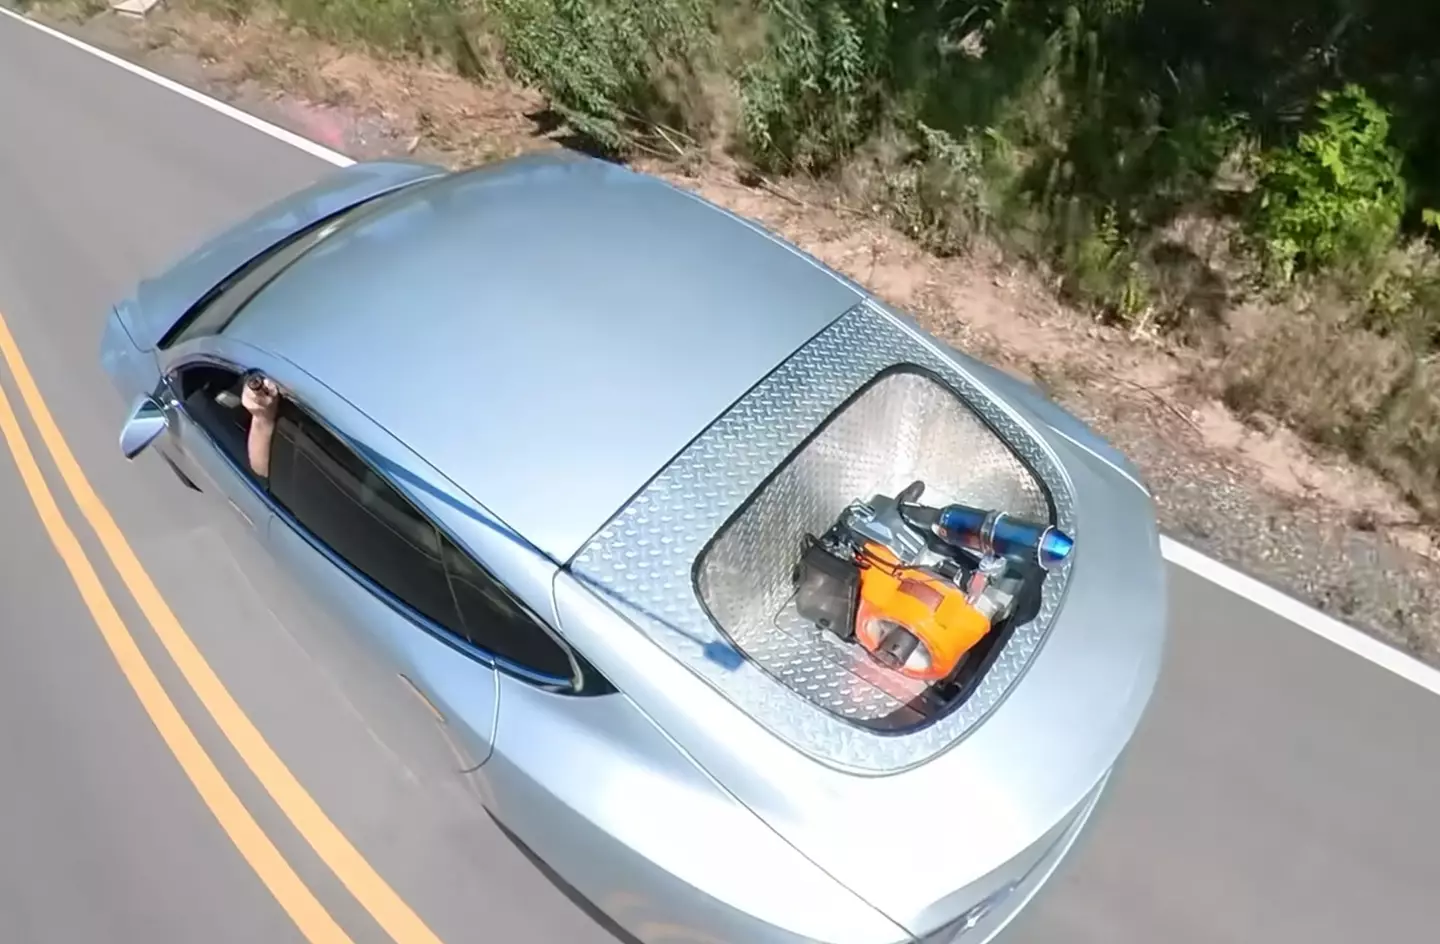 YouTuber Matt Mikka added a gas generator to his Tesla to see if he could take it on a road trip.